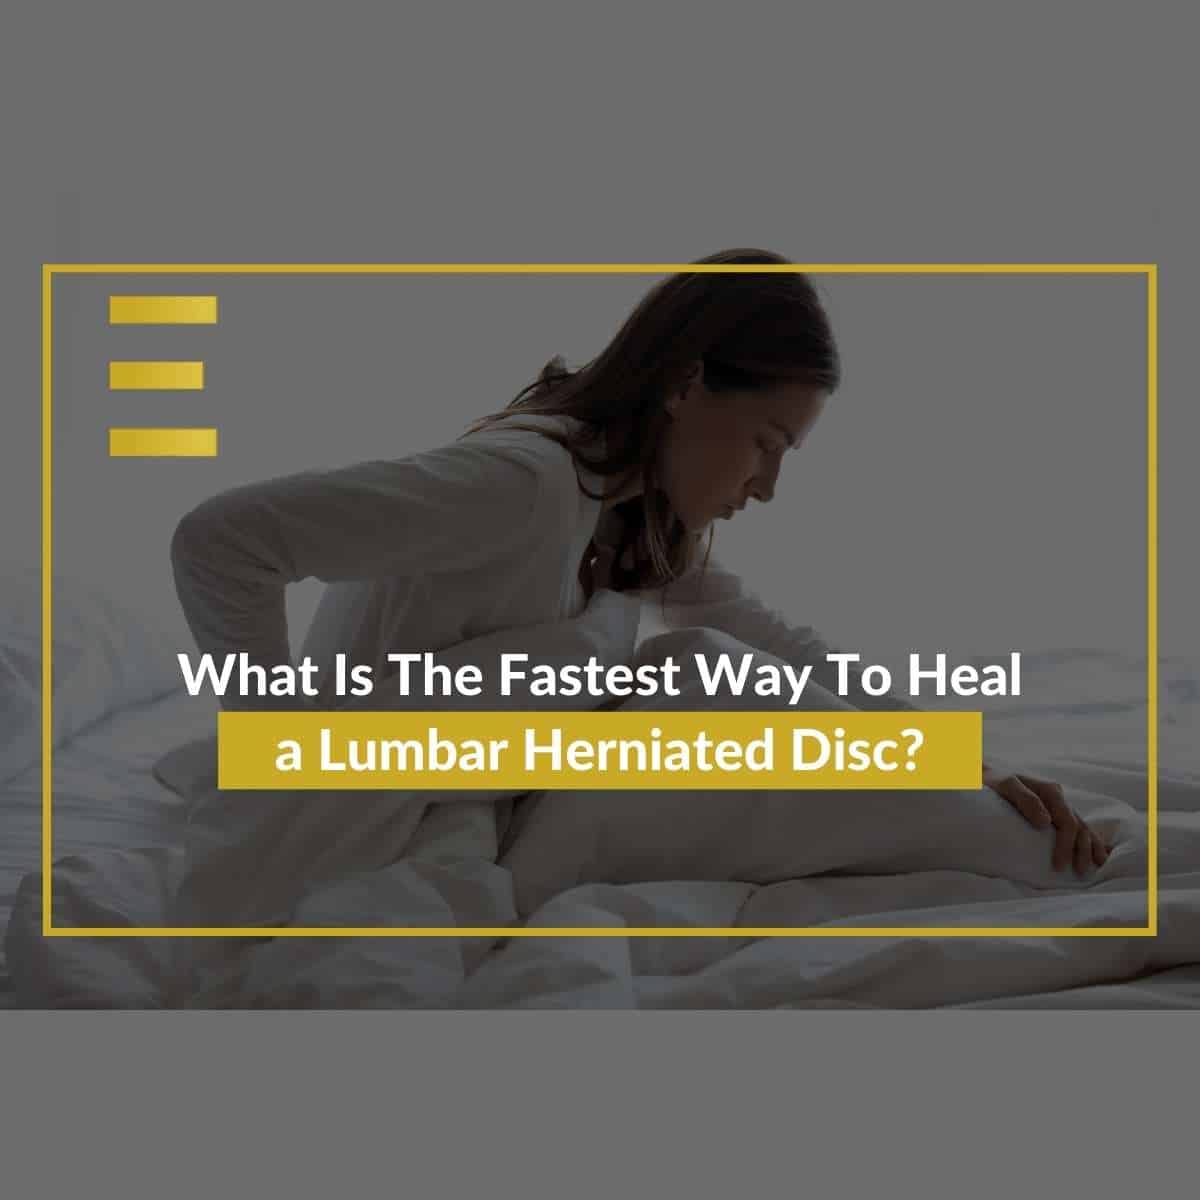 What-Is-The-Fastest-Way-To-Heal-a-Lumbar-Herniated-Disc